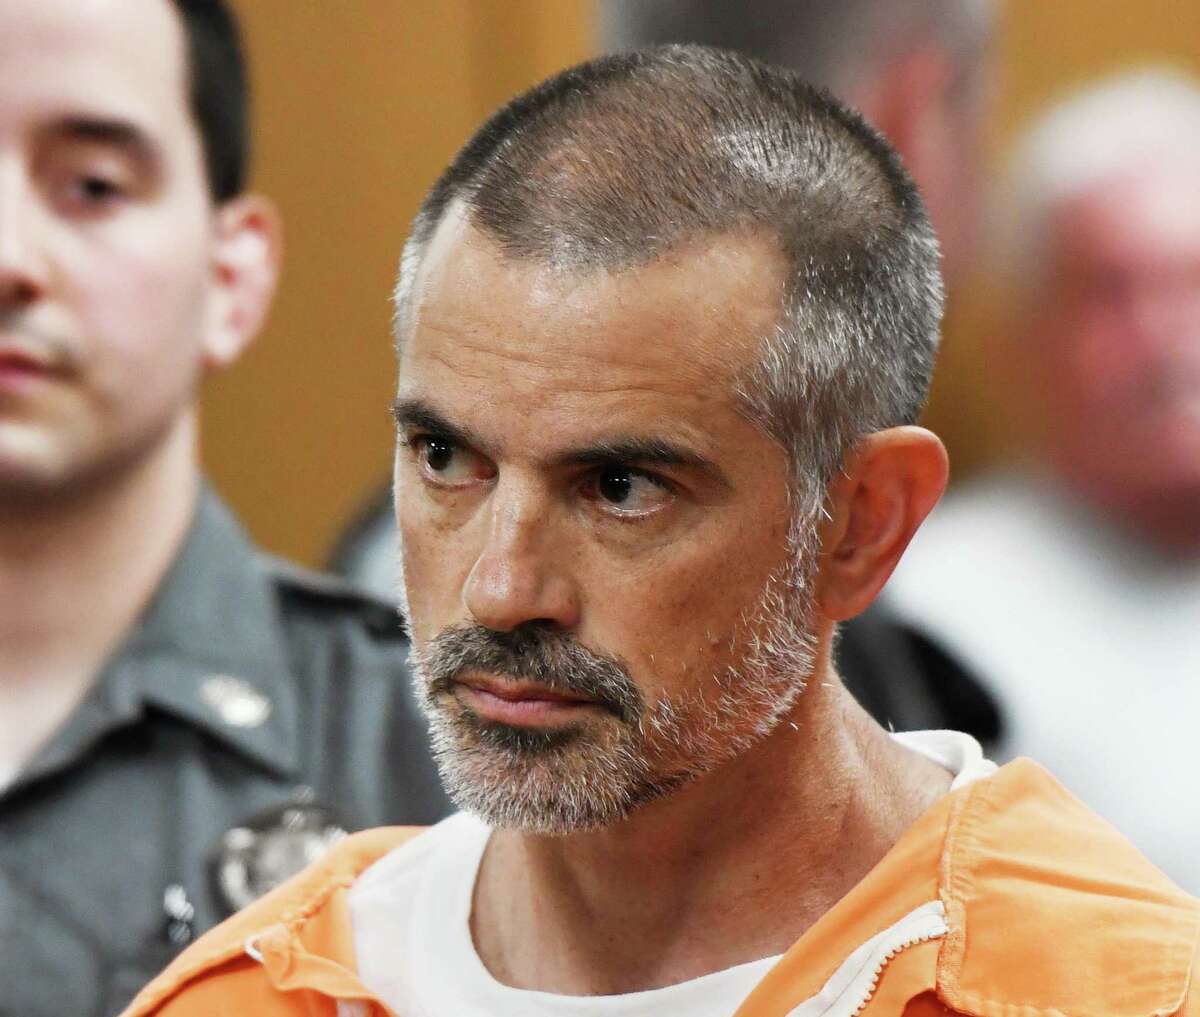 Fotis Dulos, 51, is arraigned on charges of tampering with or fabricating physical evidence and first-degree hindering prosecution at Norwalk Superior Court in Norwalk, Conn. Monday, June 3, 2019. JAN. 30 Fotis Dulos died from an apparent suicide at a New York hospital. Two days earlier, Fotis Dulos was found inside his running SUV in the garage of his Farmington home, police said. Police conducted a welfare check when he didn’t show up for a court hearing where a judge could have revoked his bond and sent him back to jail.